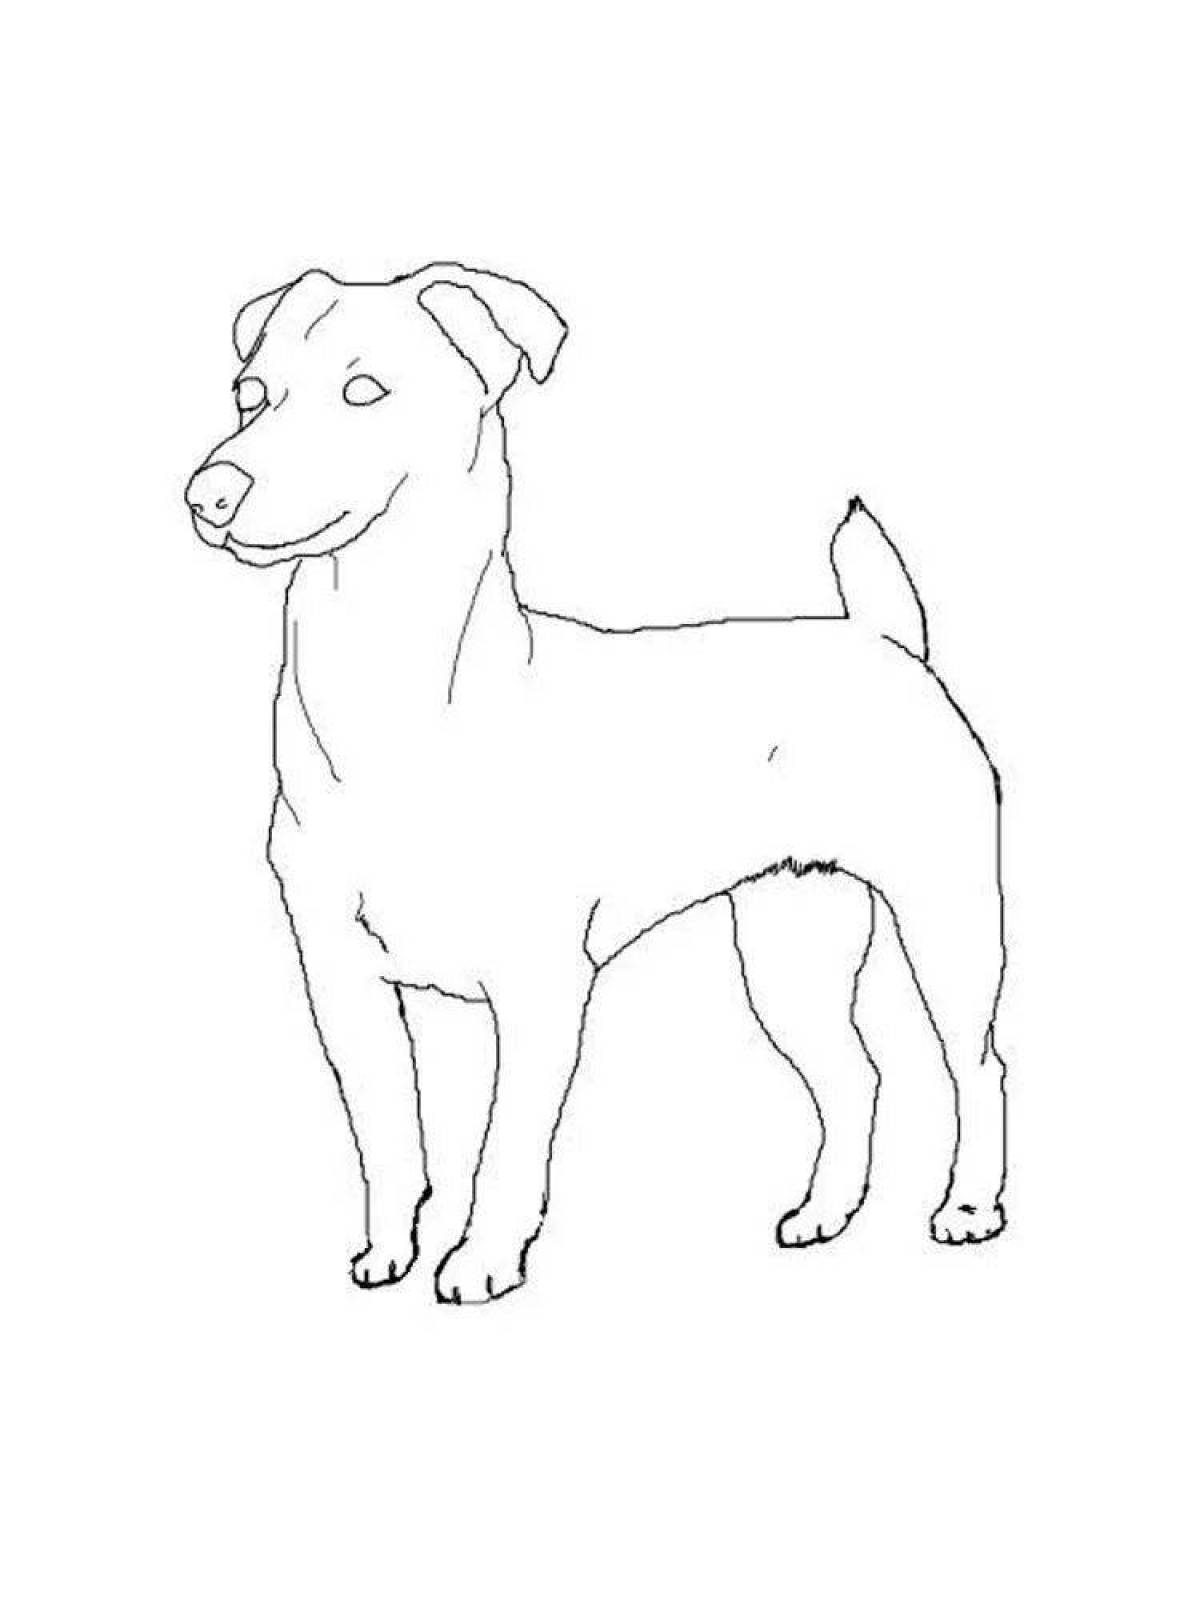 Jack Russell's charming coloring book